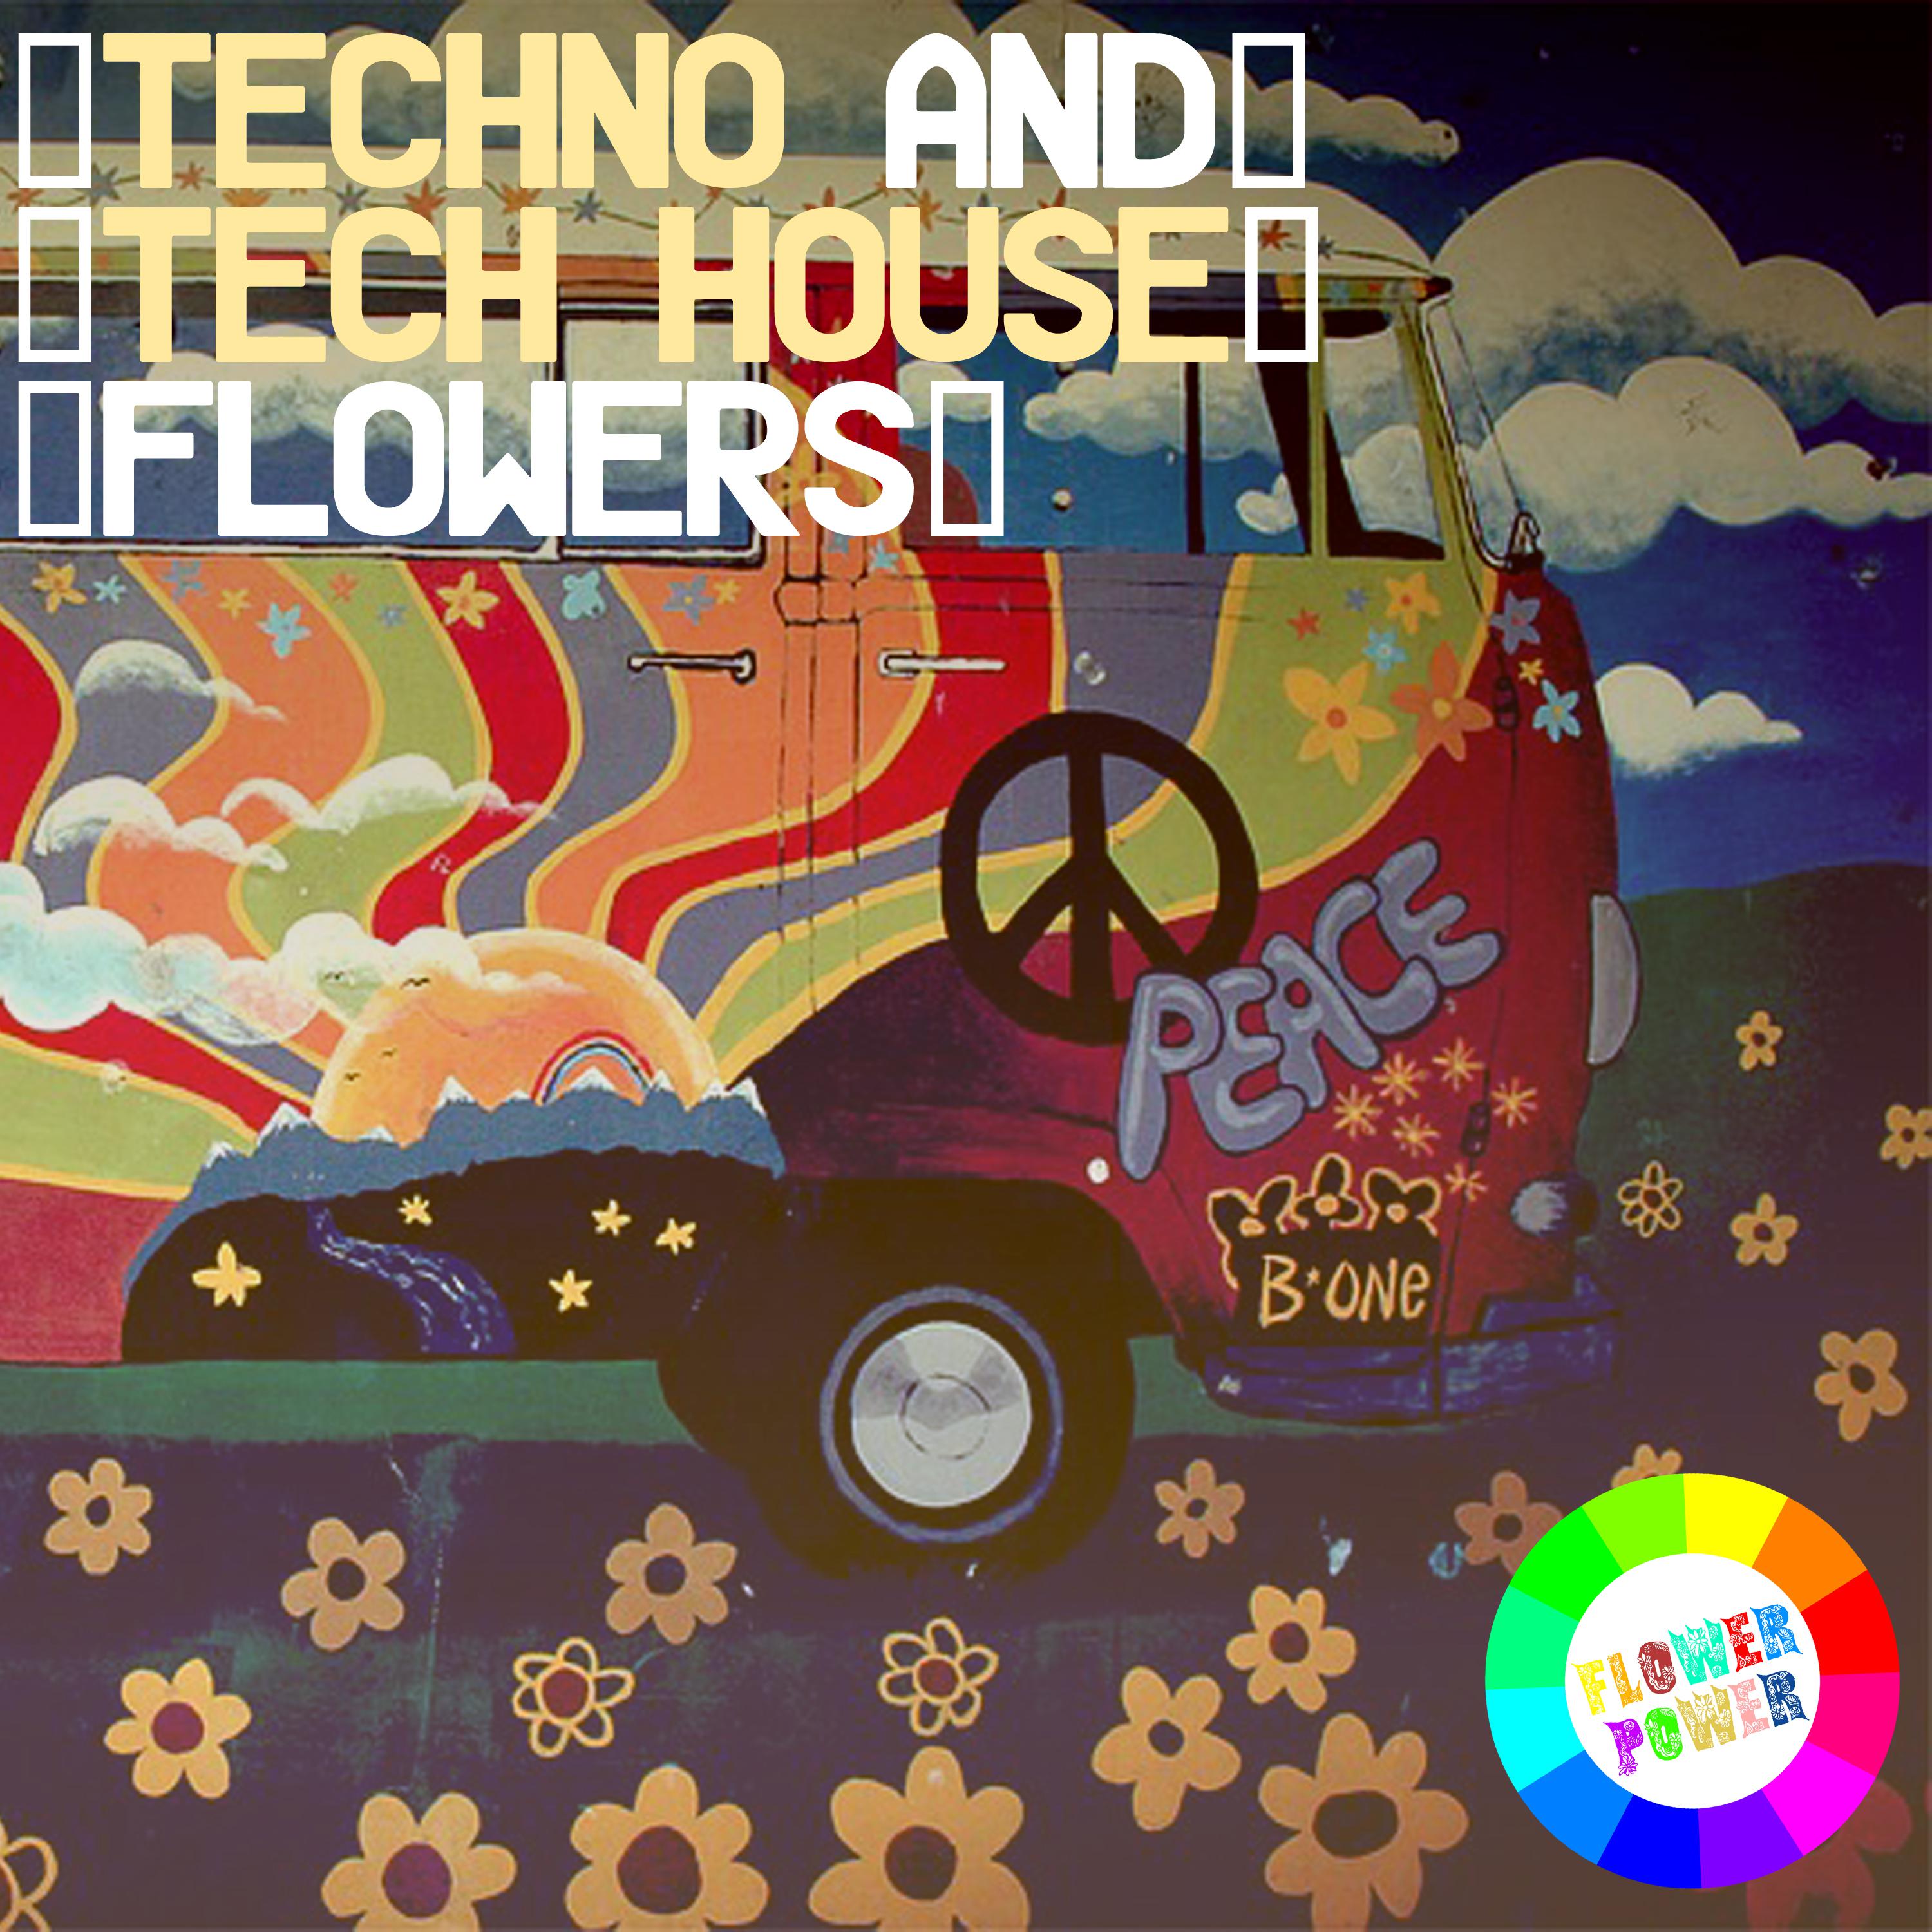 Techno and Tech House Flowers 2